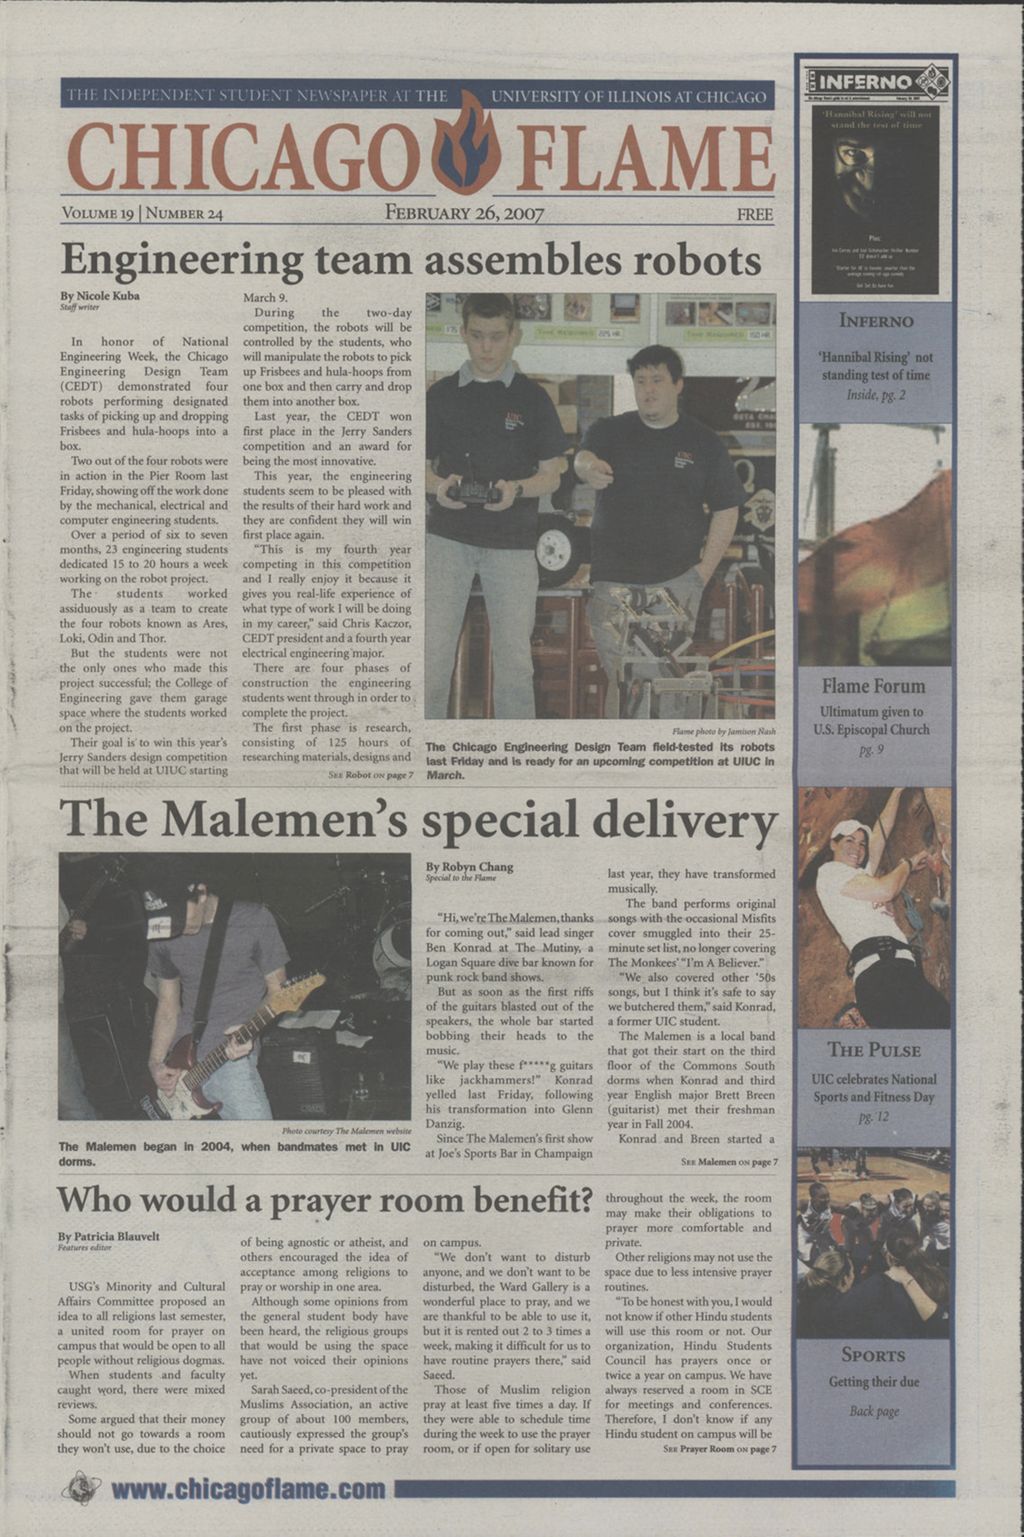 Chicago Flame (February 26, 2007)